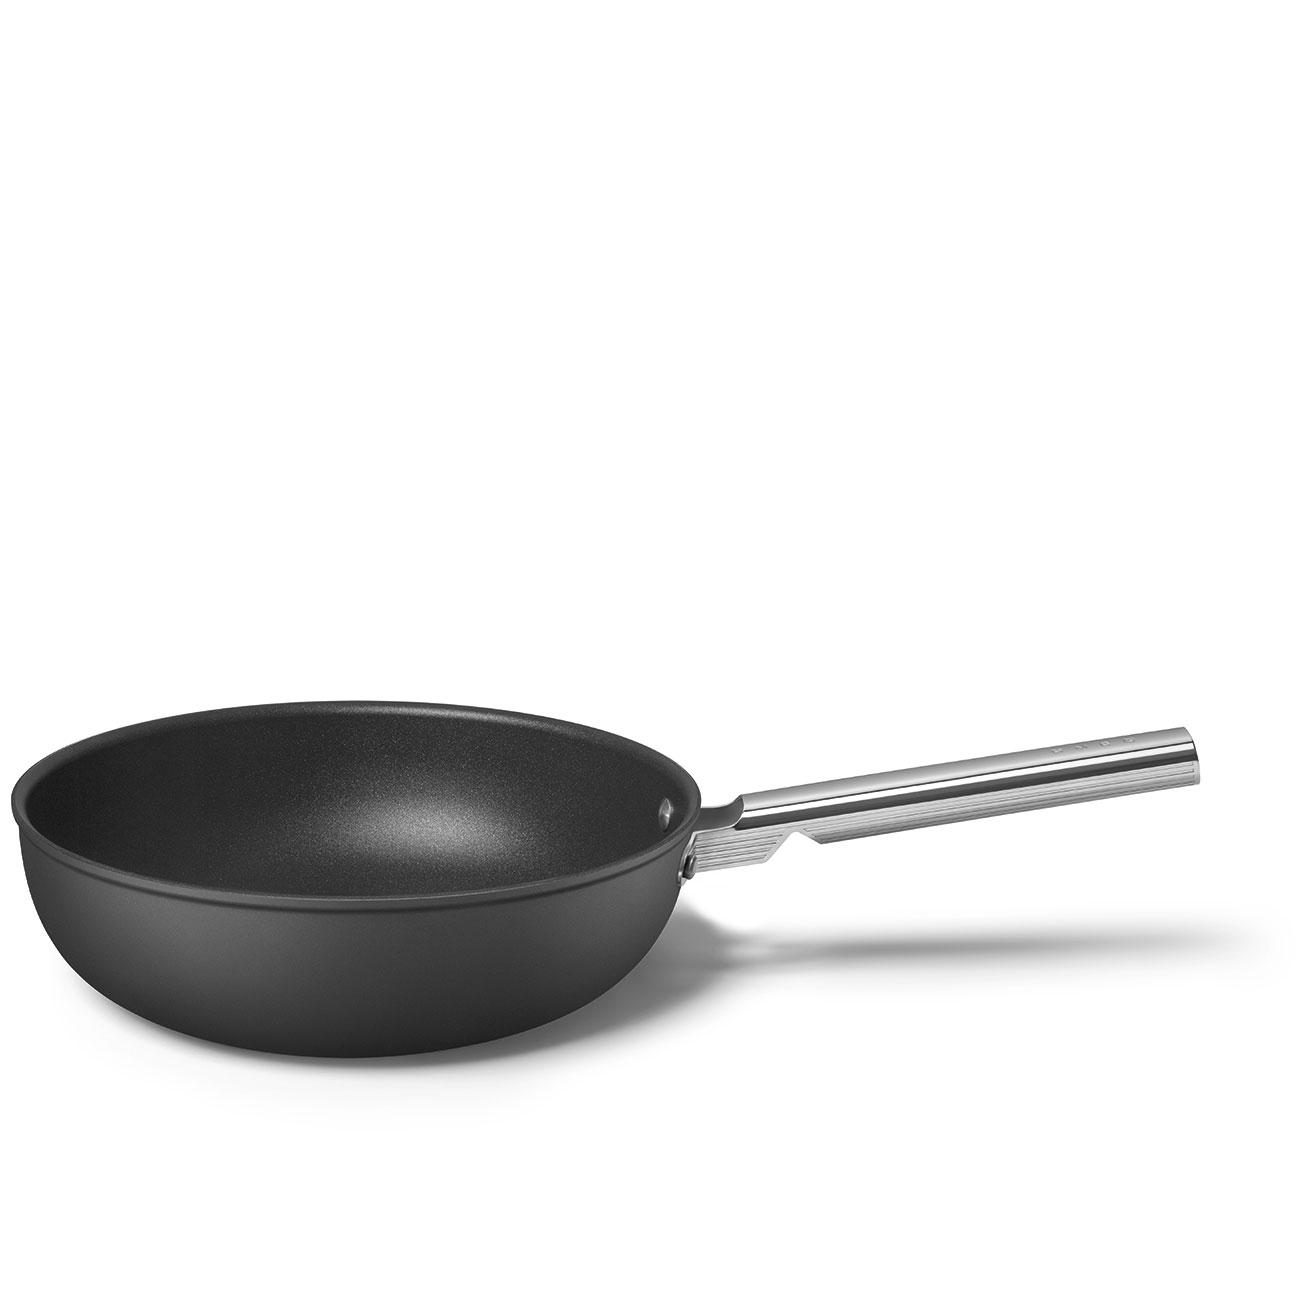 Smeg Black Non-stick Wok with Stainless Steel Handle - CKFW3001BLM_2